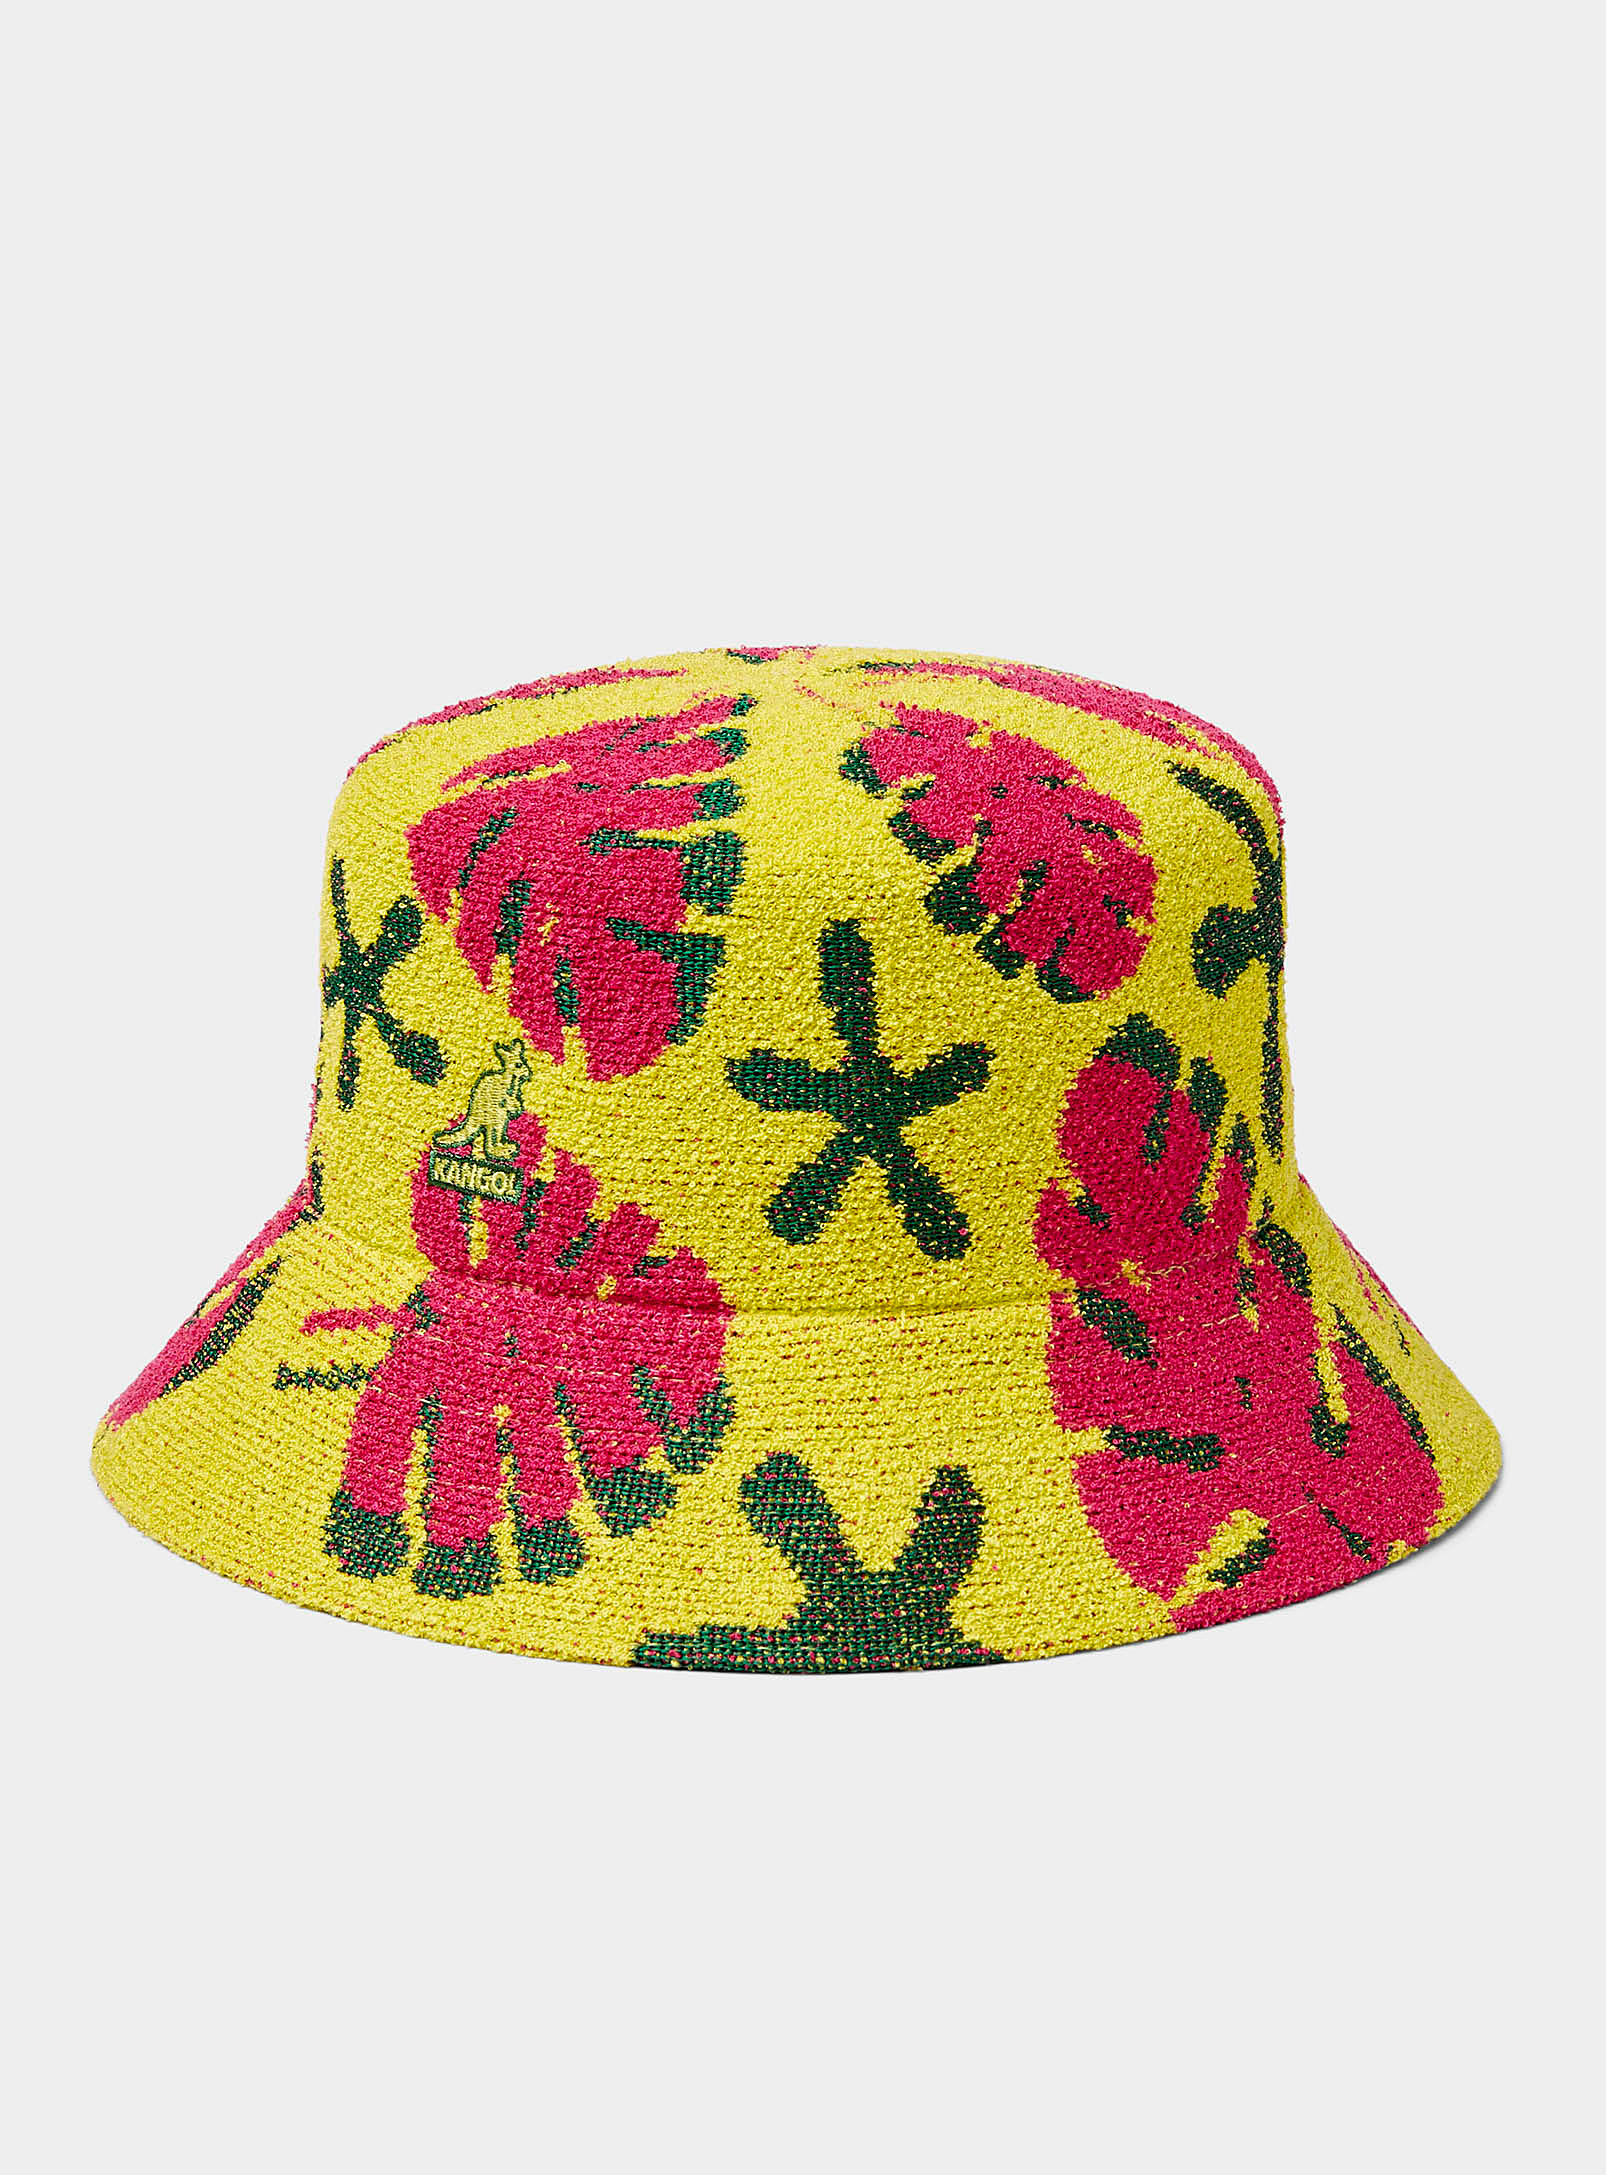 Kangol Retro Foliage Terry Bucket Hat In Patterned Yellow